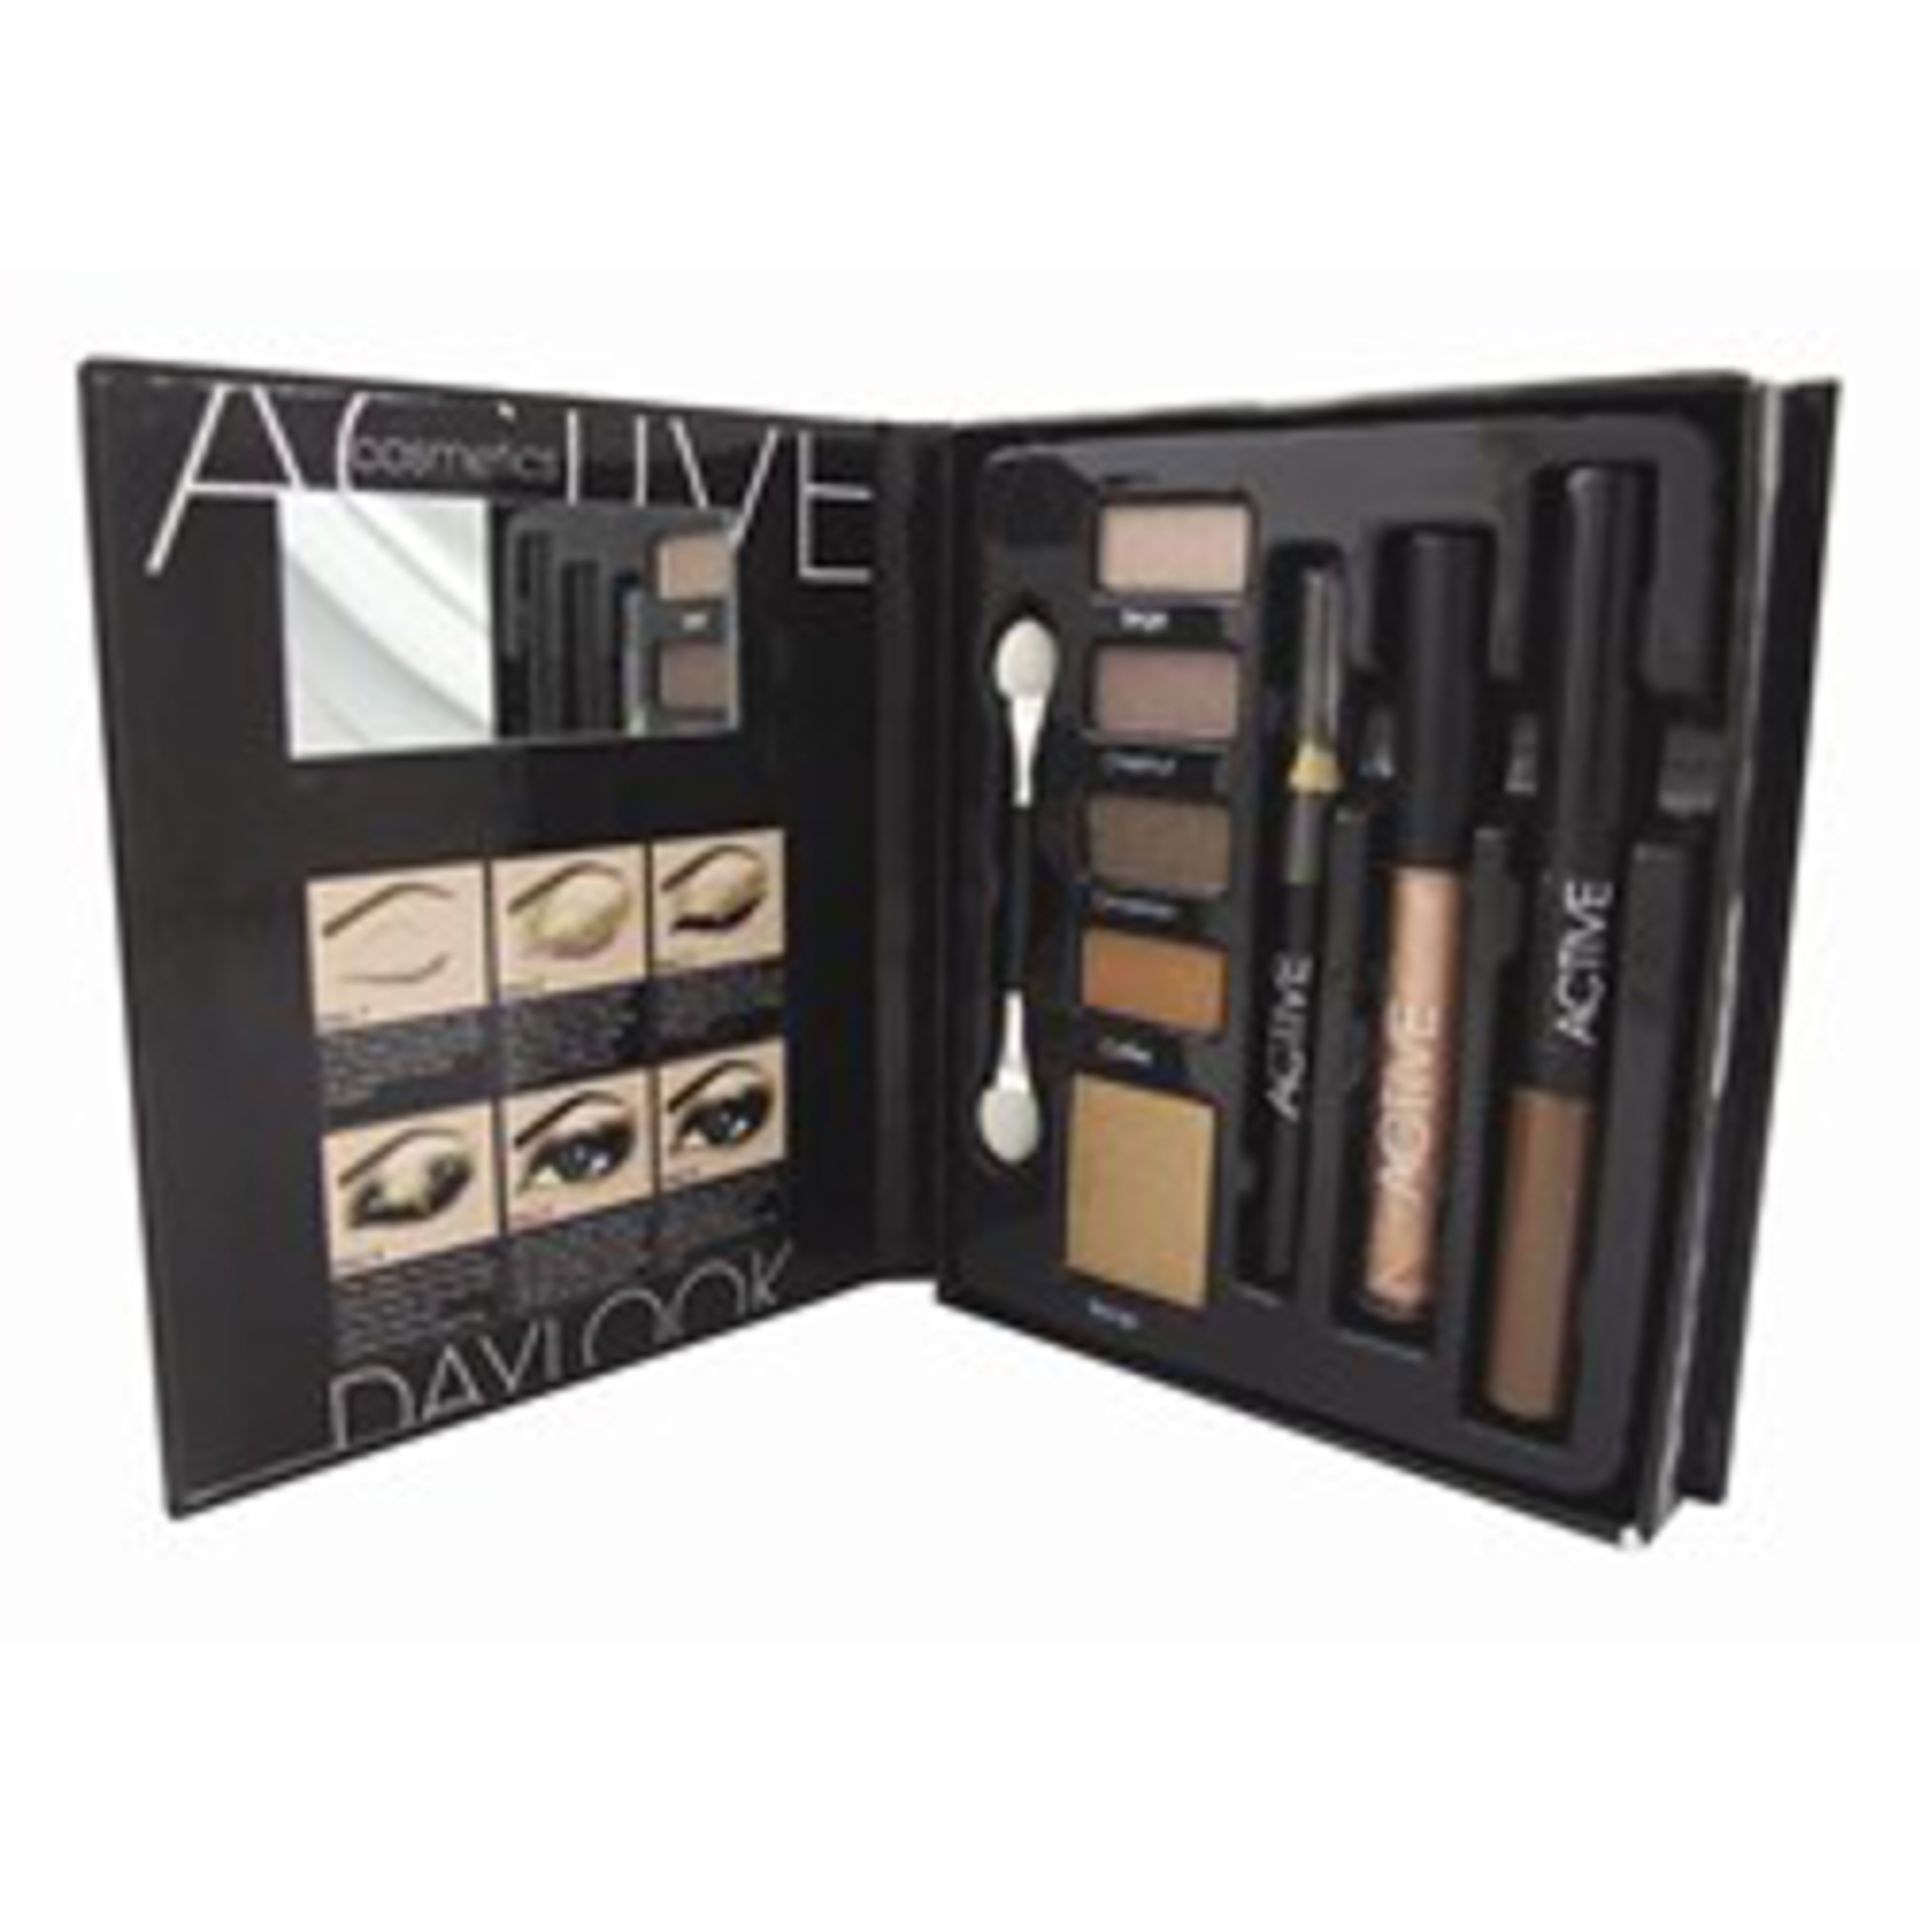 V Brand New Active Glamour Day Look Gift Set